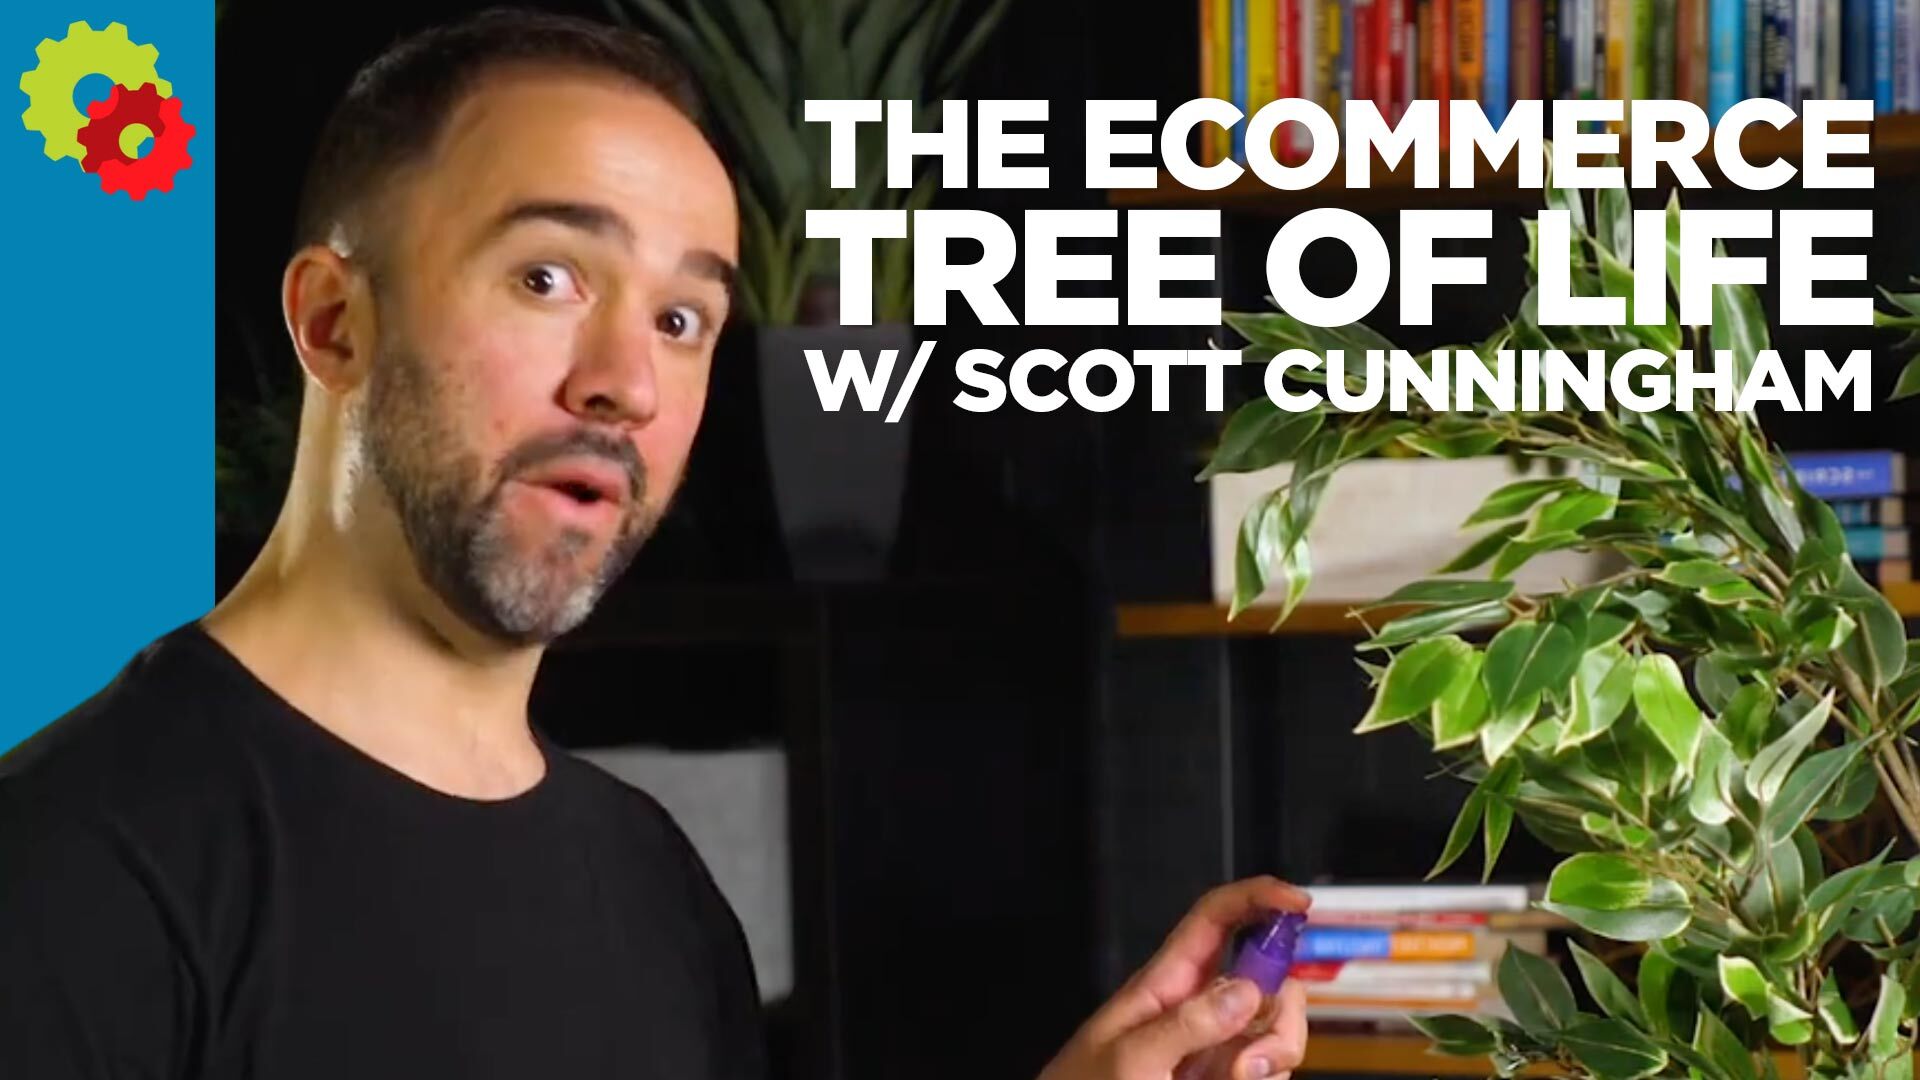 The Ecommerce Tree of Life with Scott Cunningham [VIDEO]